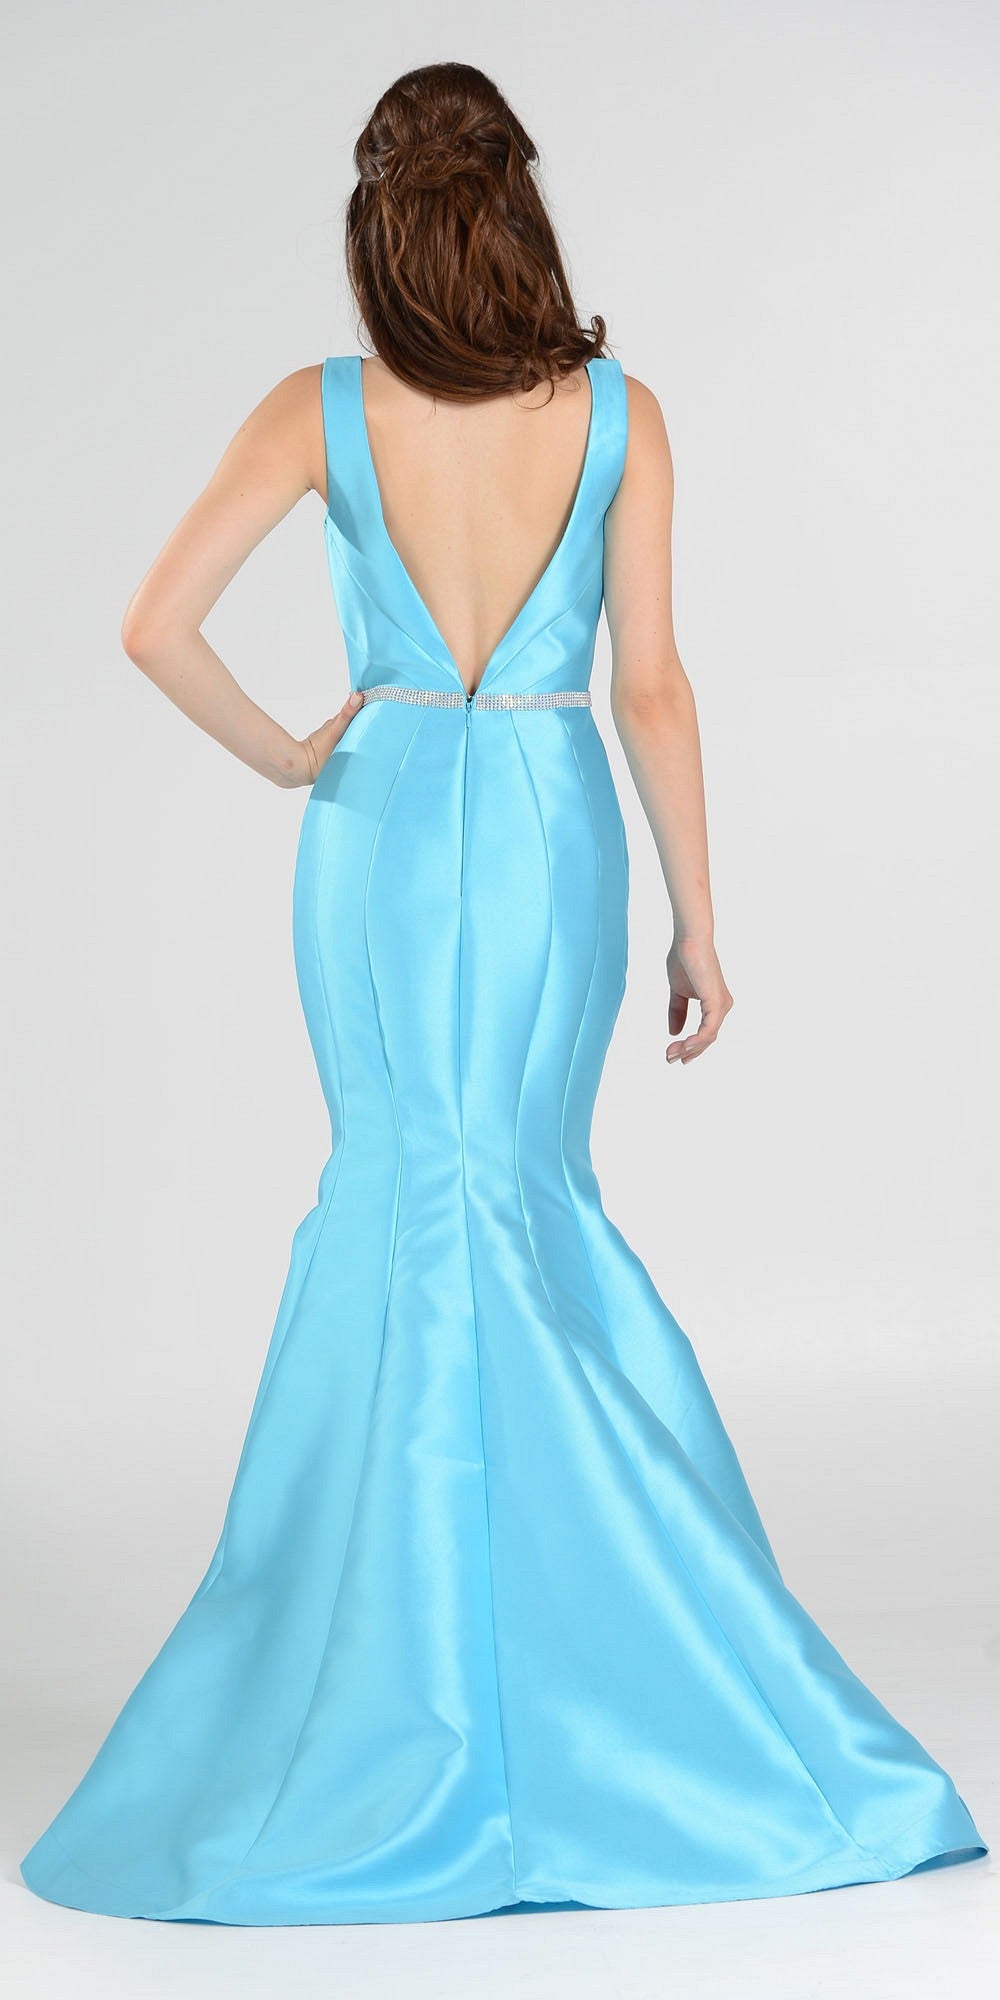 High and Low Mermaid Prom Gown V-Shape Back Embellished Waist Turquoise